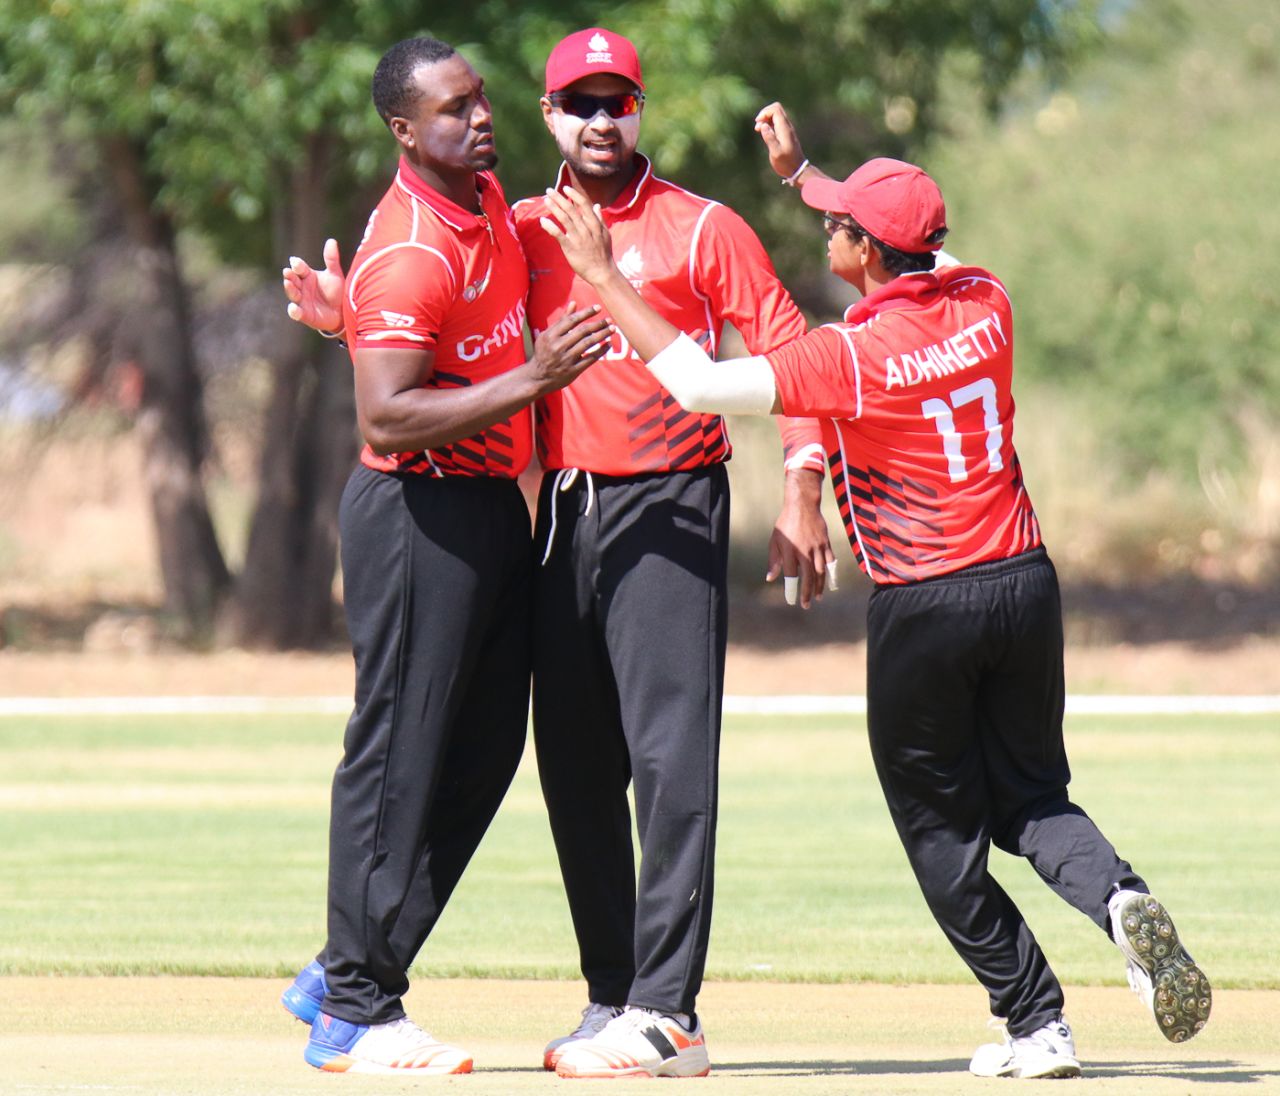 Dilon Heyliger gets hugs from Ruvindu Gunasekera and Bhavindu Adhihetty after taking his first wicket, Canada v Oman, ICC World Cricket League Division Two, Windhoek, February 8, 2018